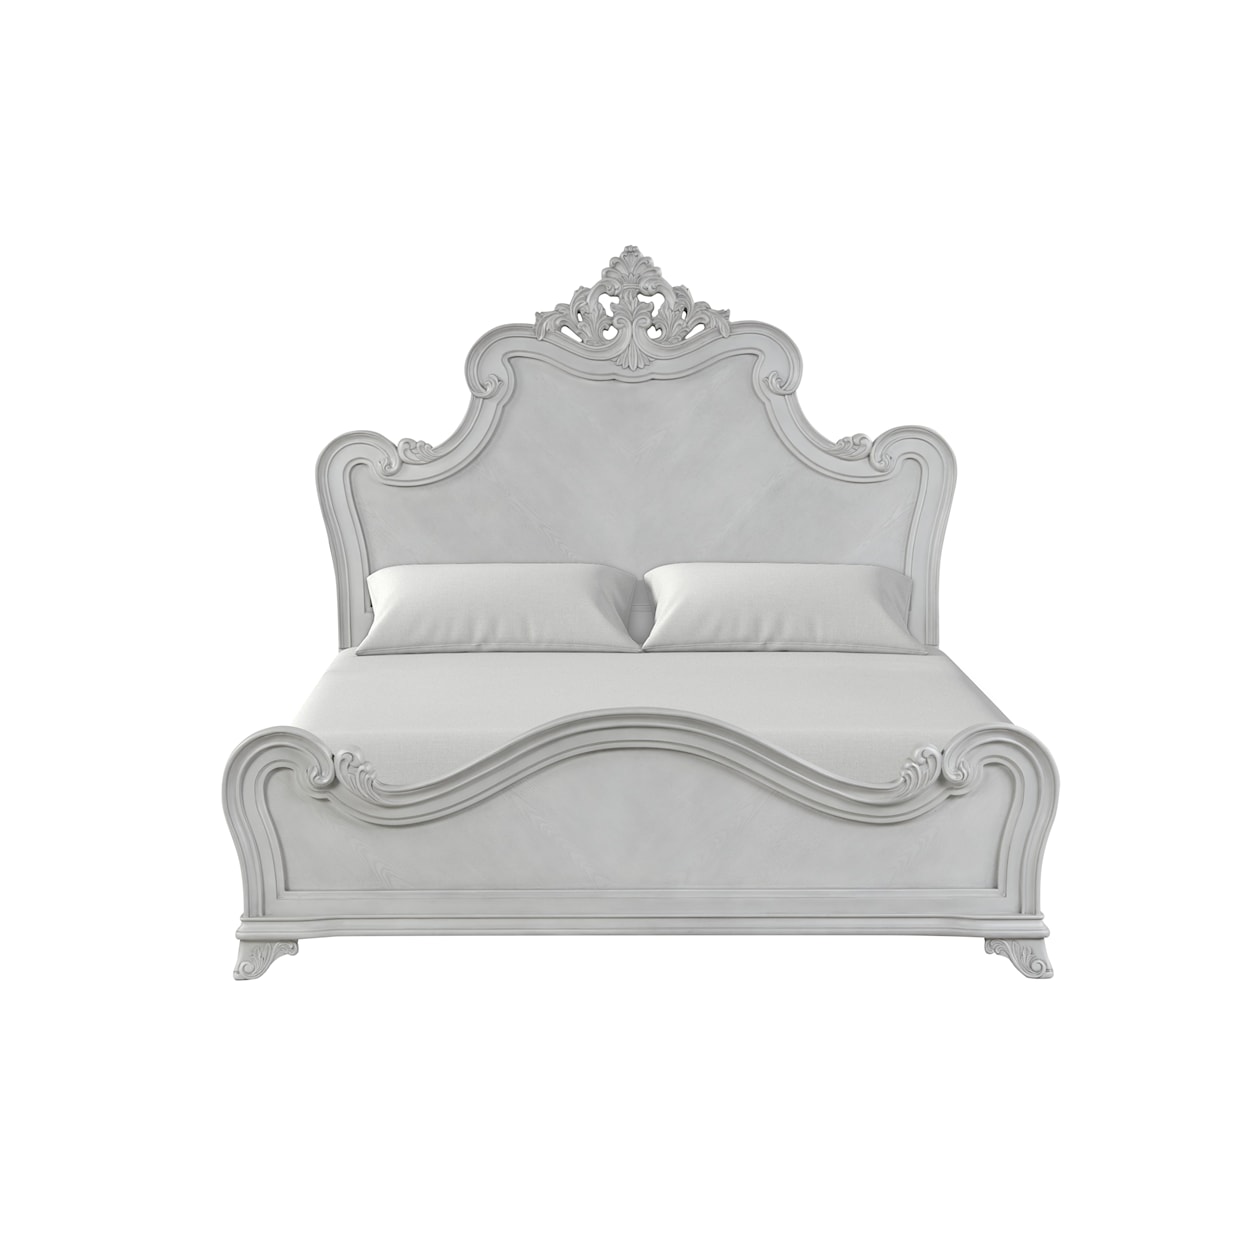 New Classic Furniture Cambria Hills Queen Arched Bed